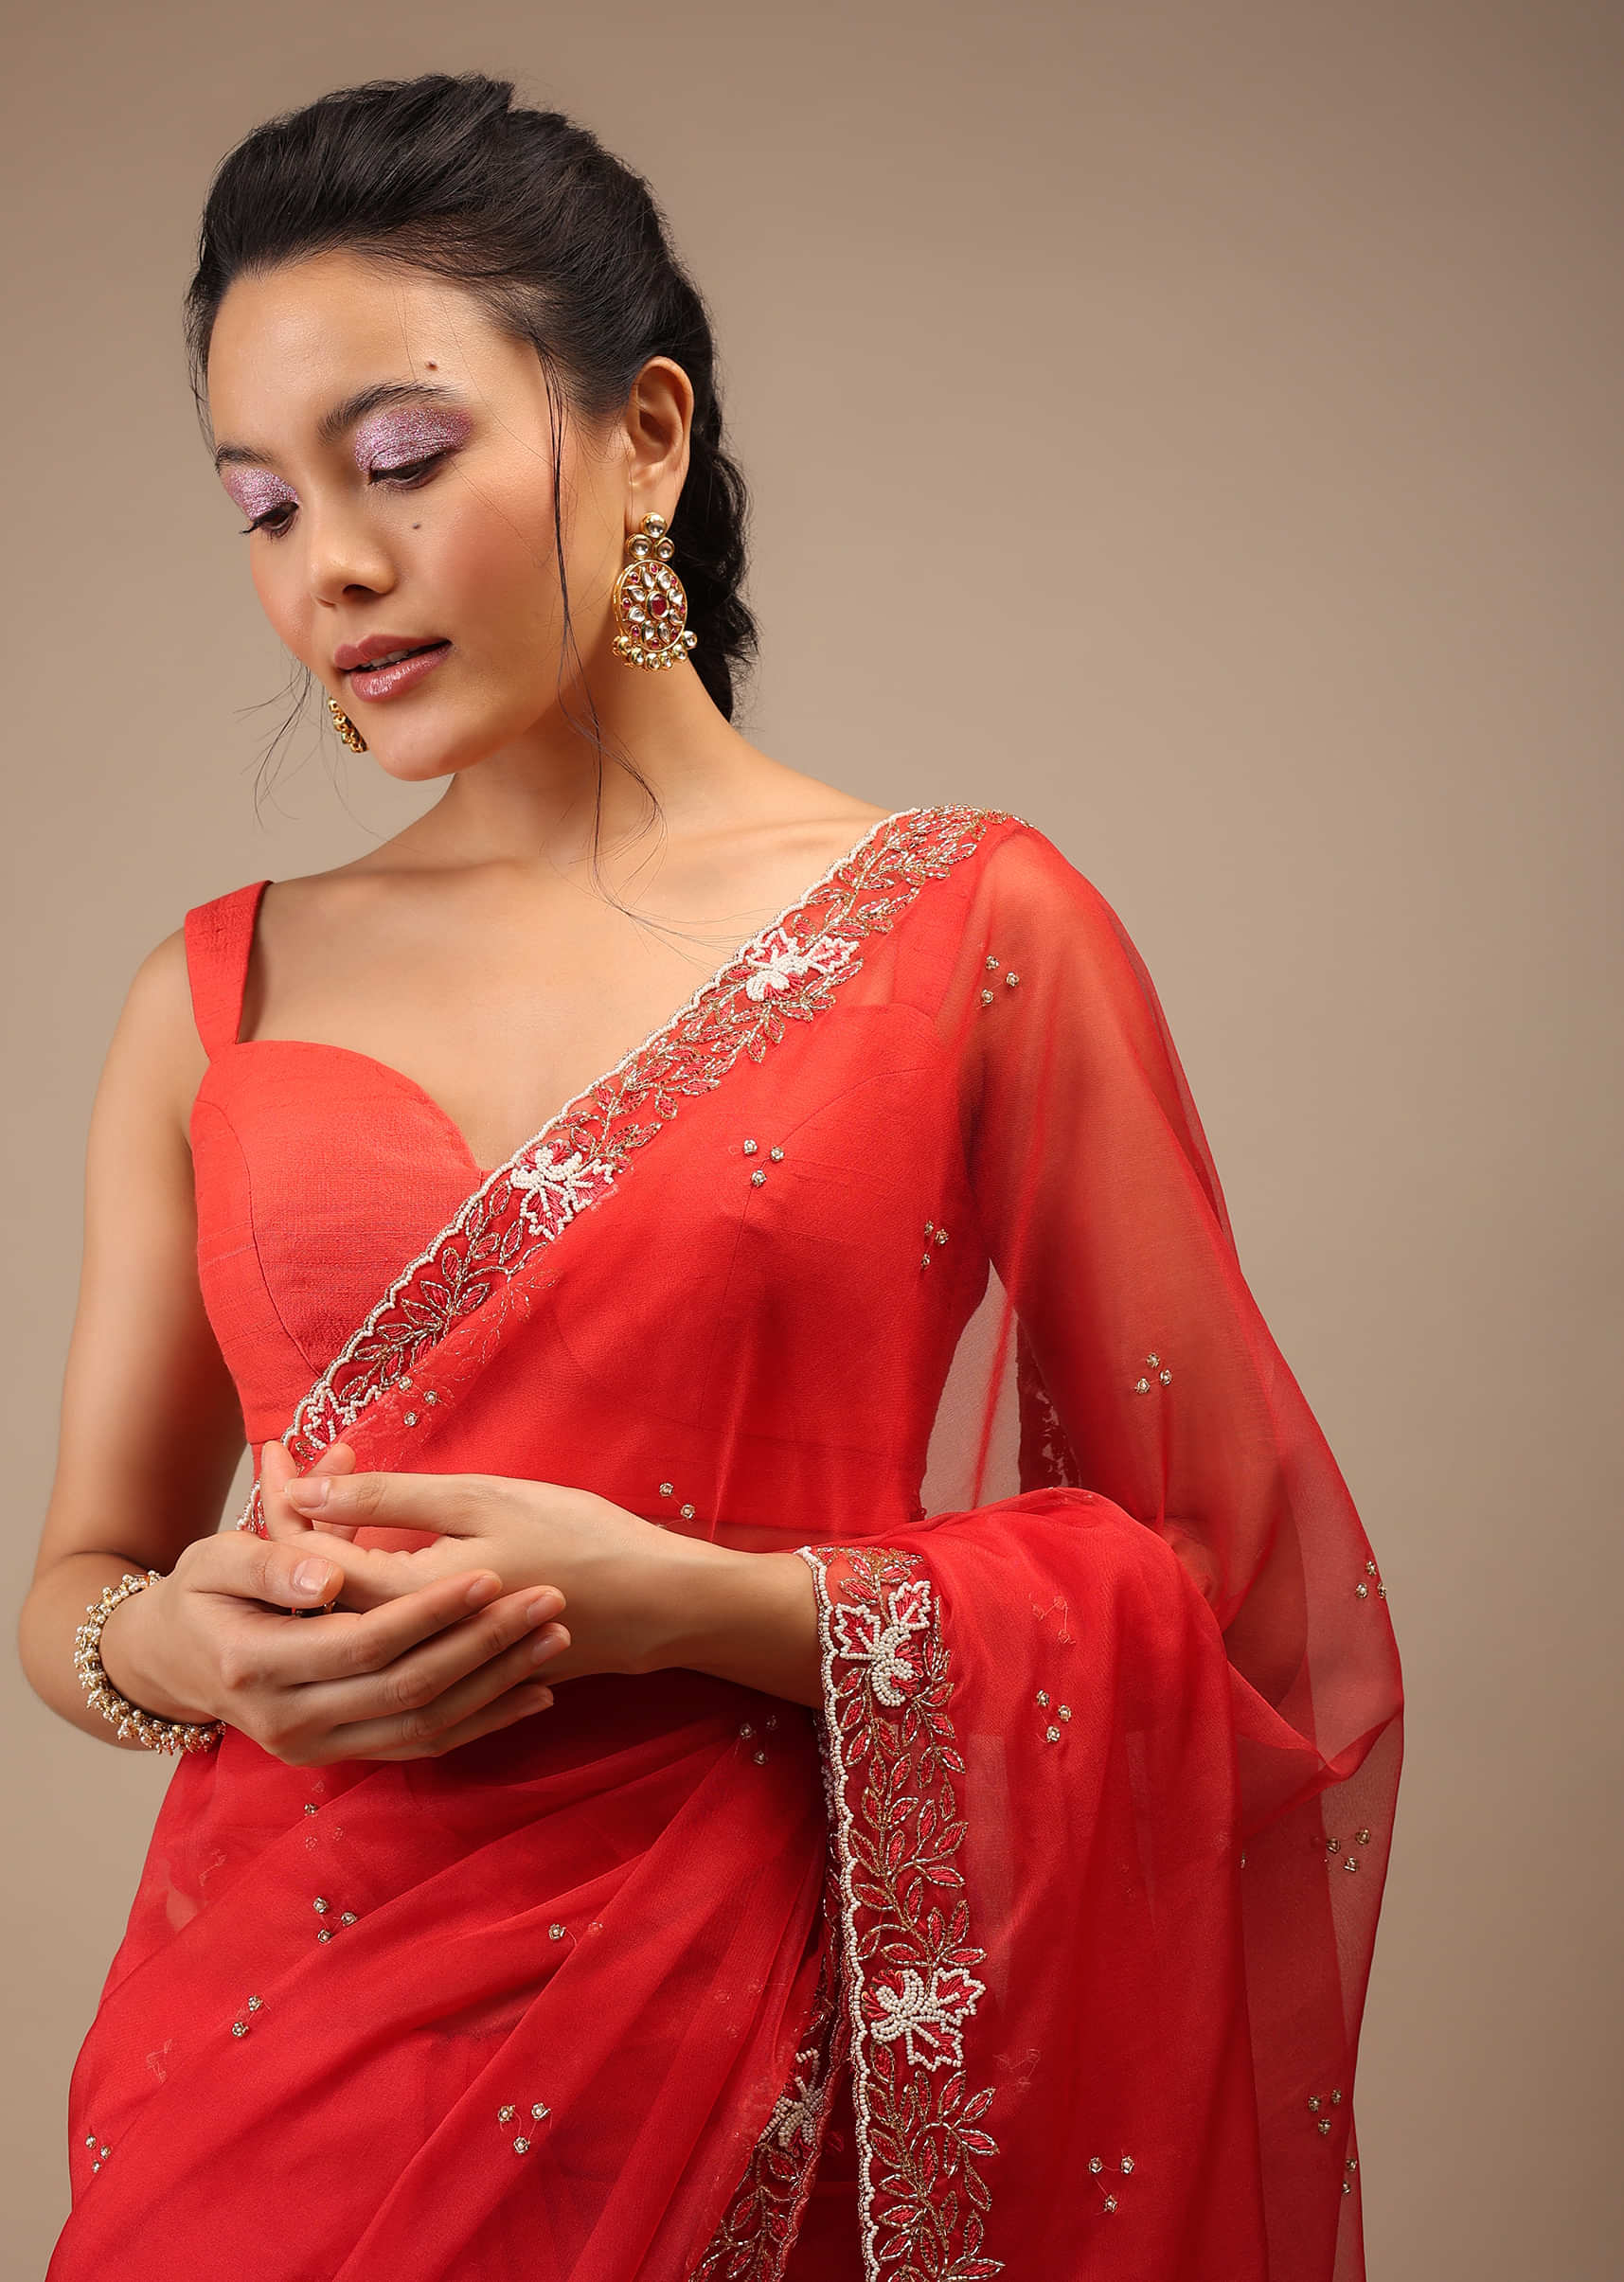 Poppy Red Organza Saree With Pink Resham Work, Cut Dana And Floral Embroidery Buttis